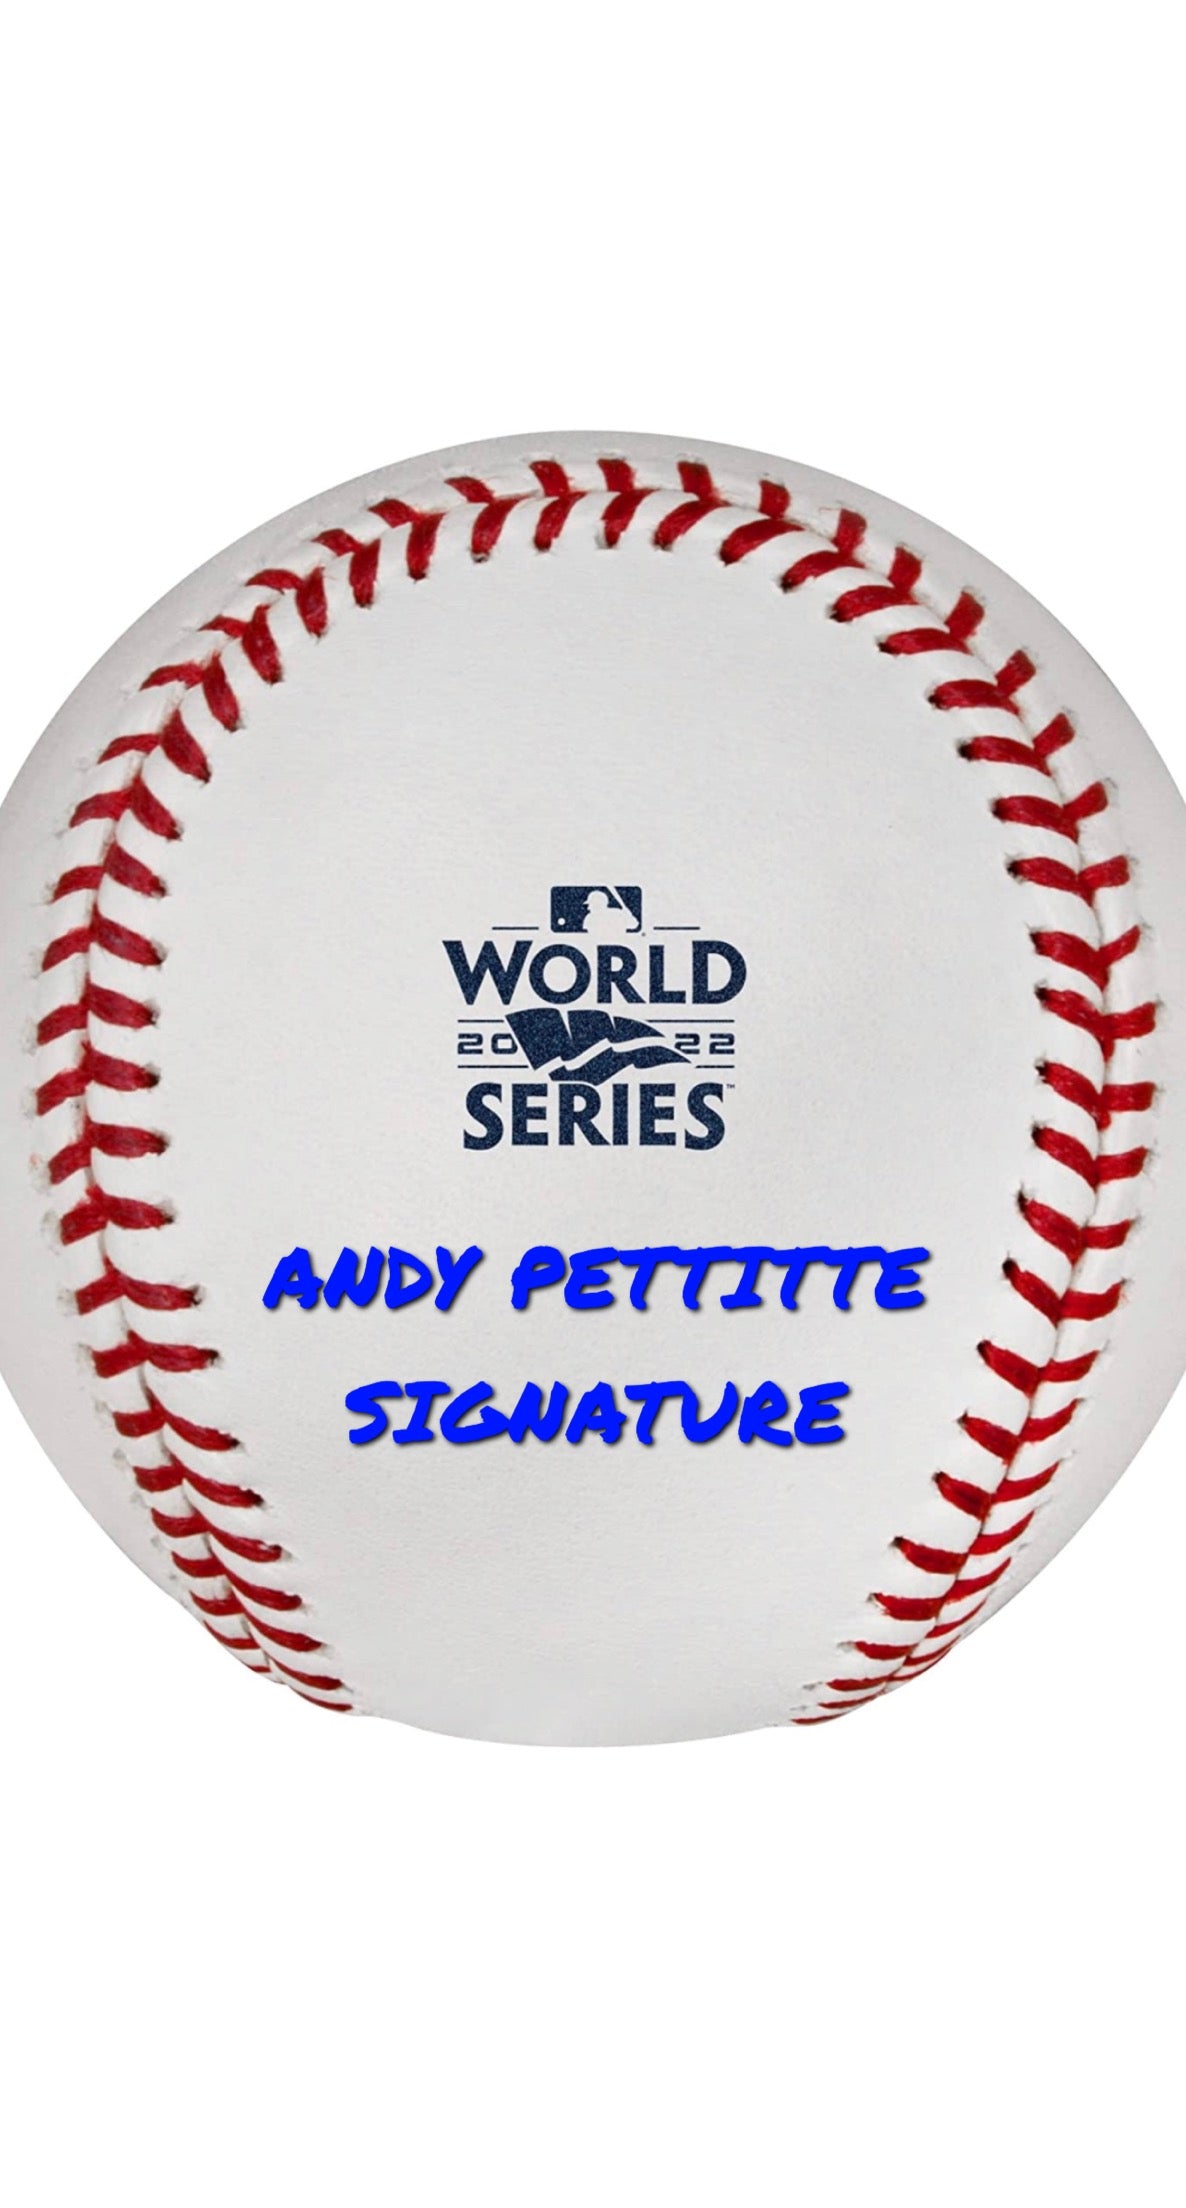 Andy Pettitte Signed 2022 World Series Baseball (Pre-Order)